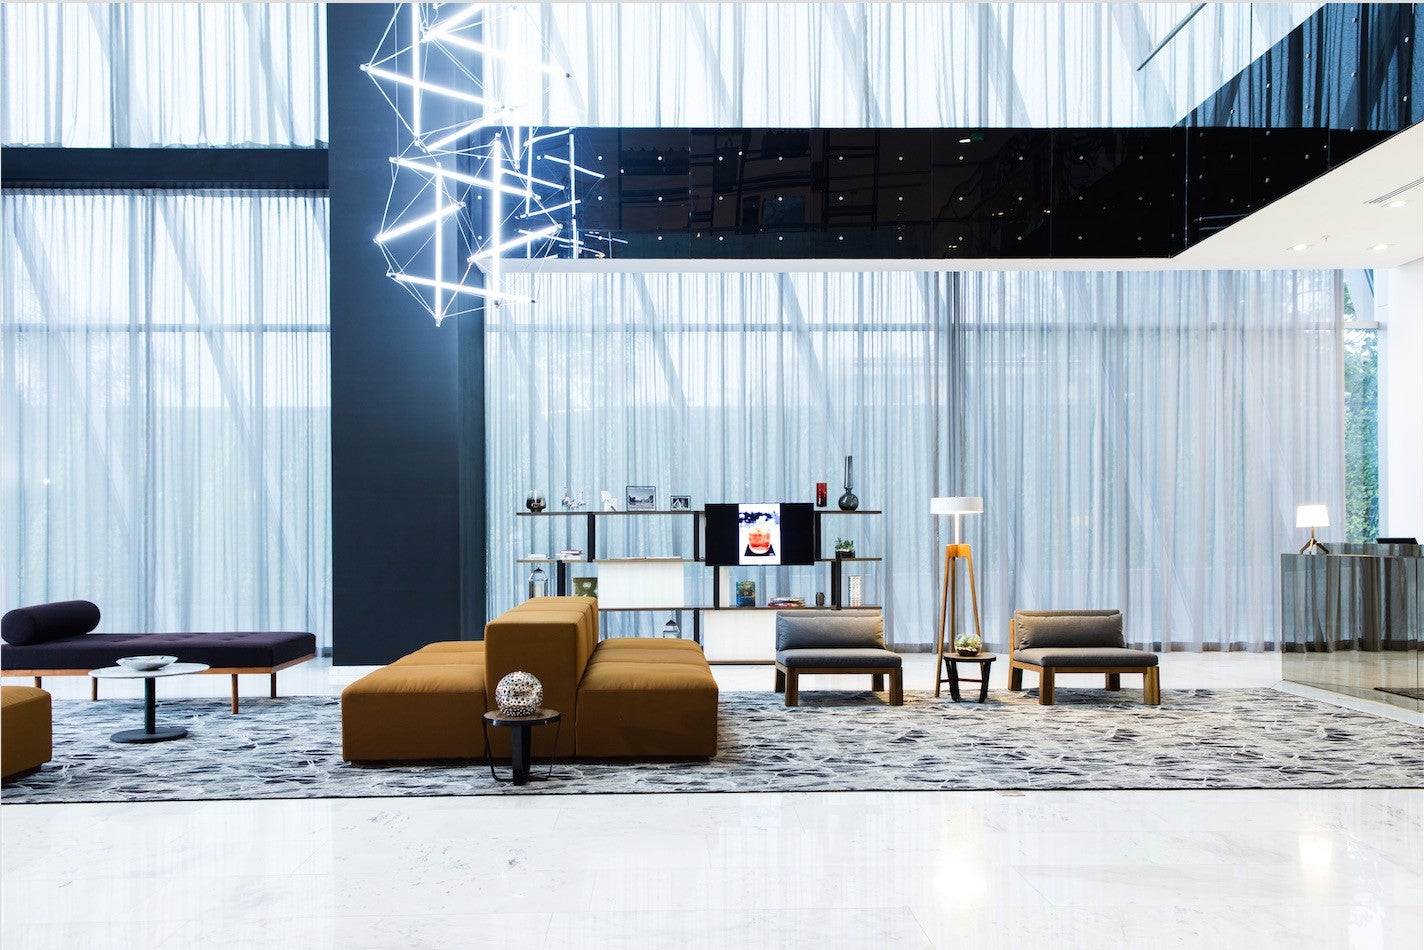 Recreate The Look of Mexico’s Hottest New Hotel at Home Lobby